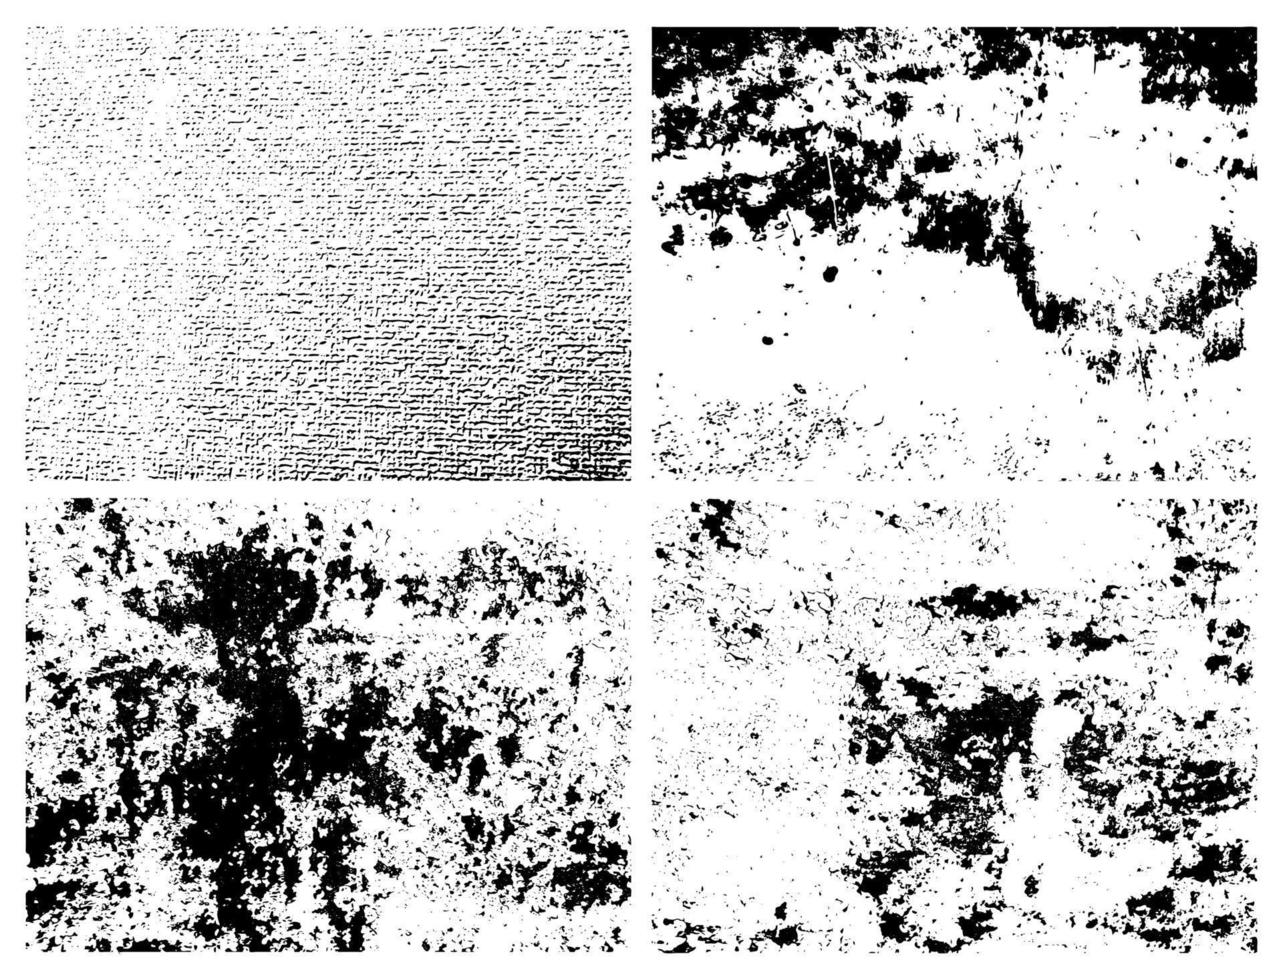 Grunge grainy dirty texture. Set of four abstract urban distress overlay backgrounds. Vector illustration